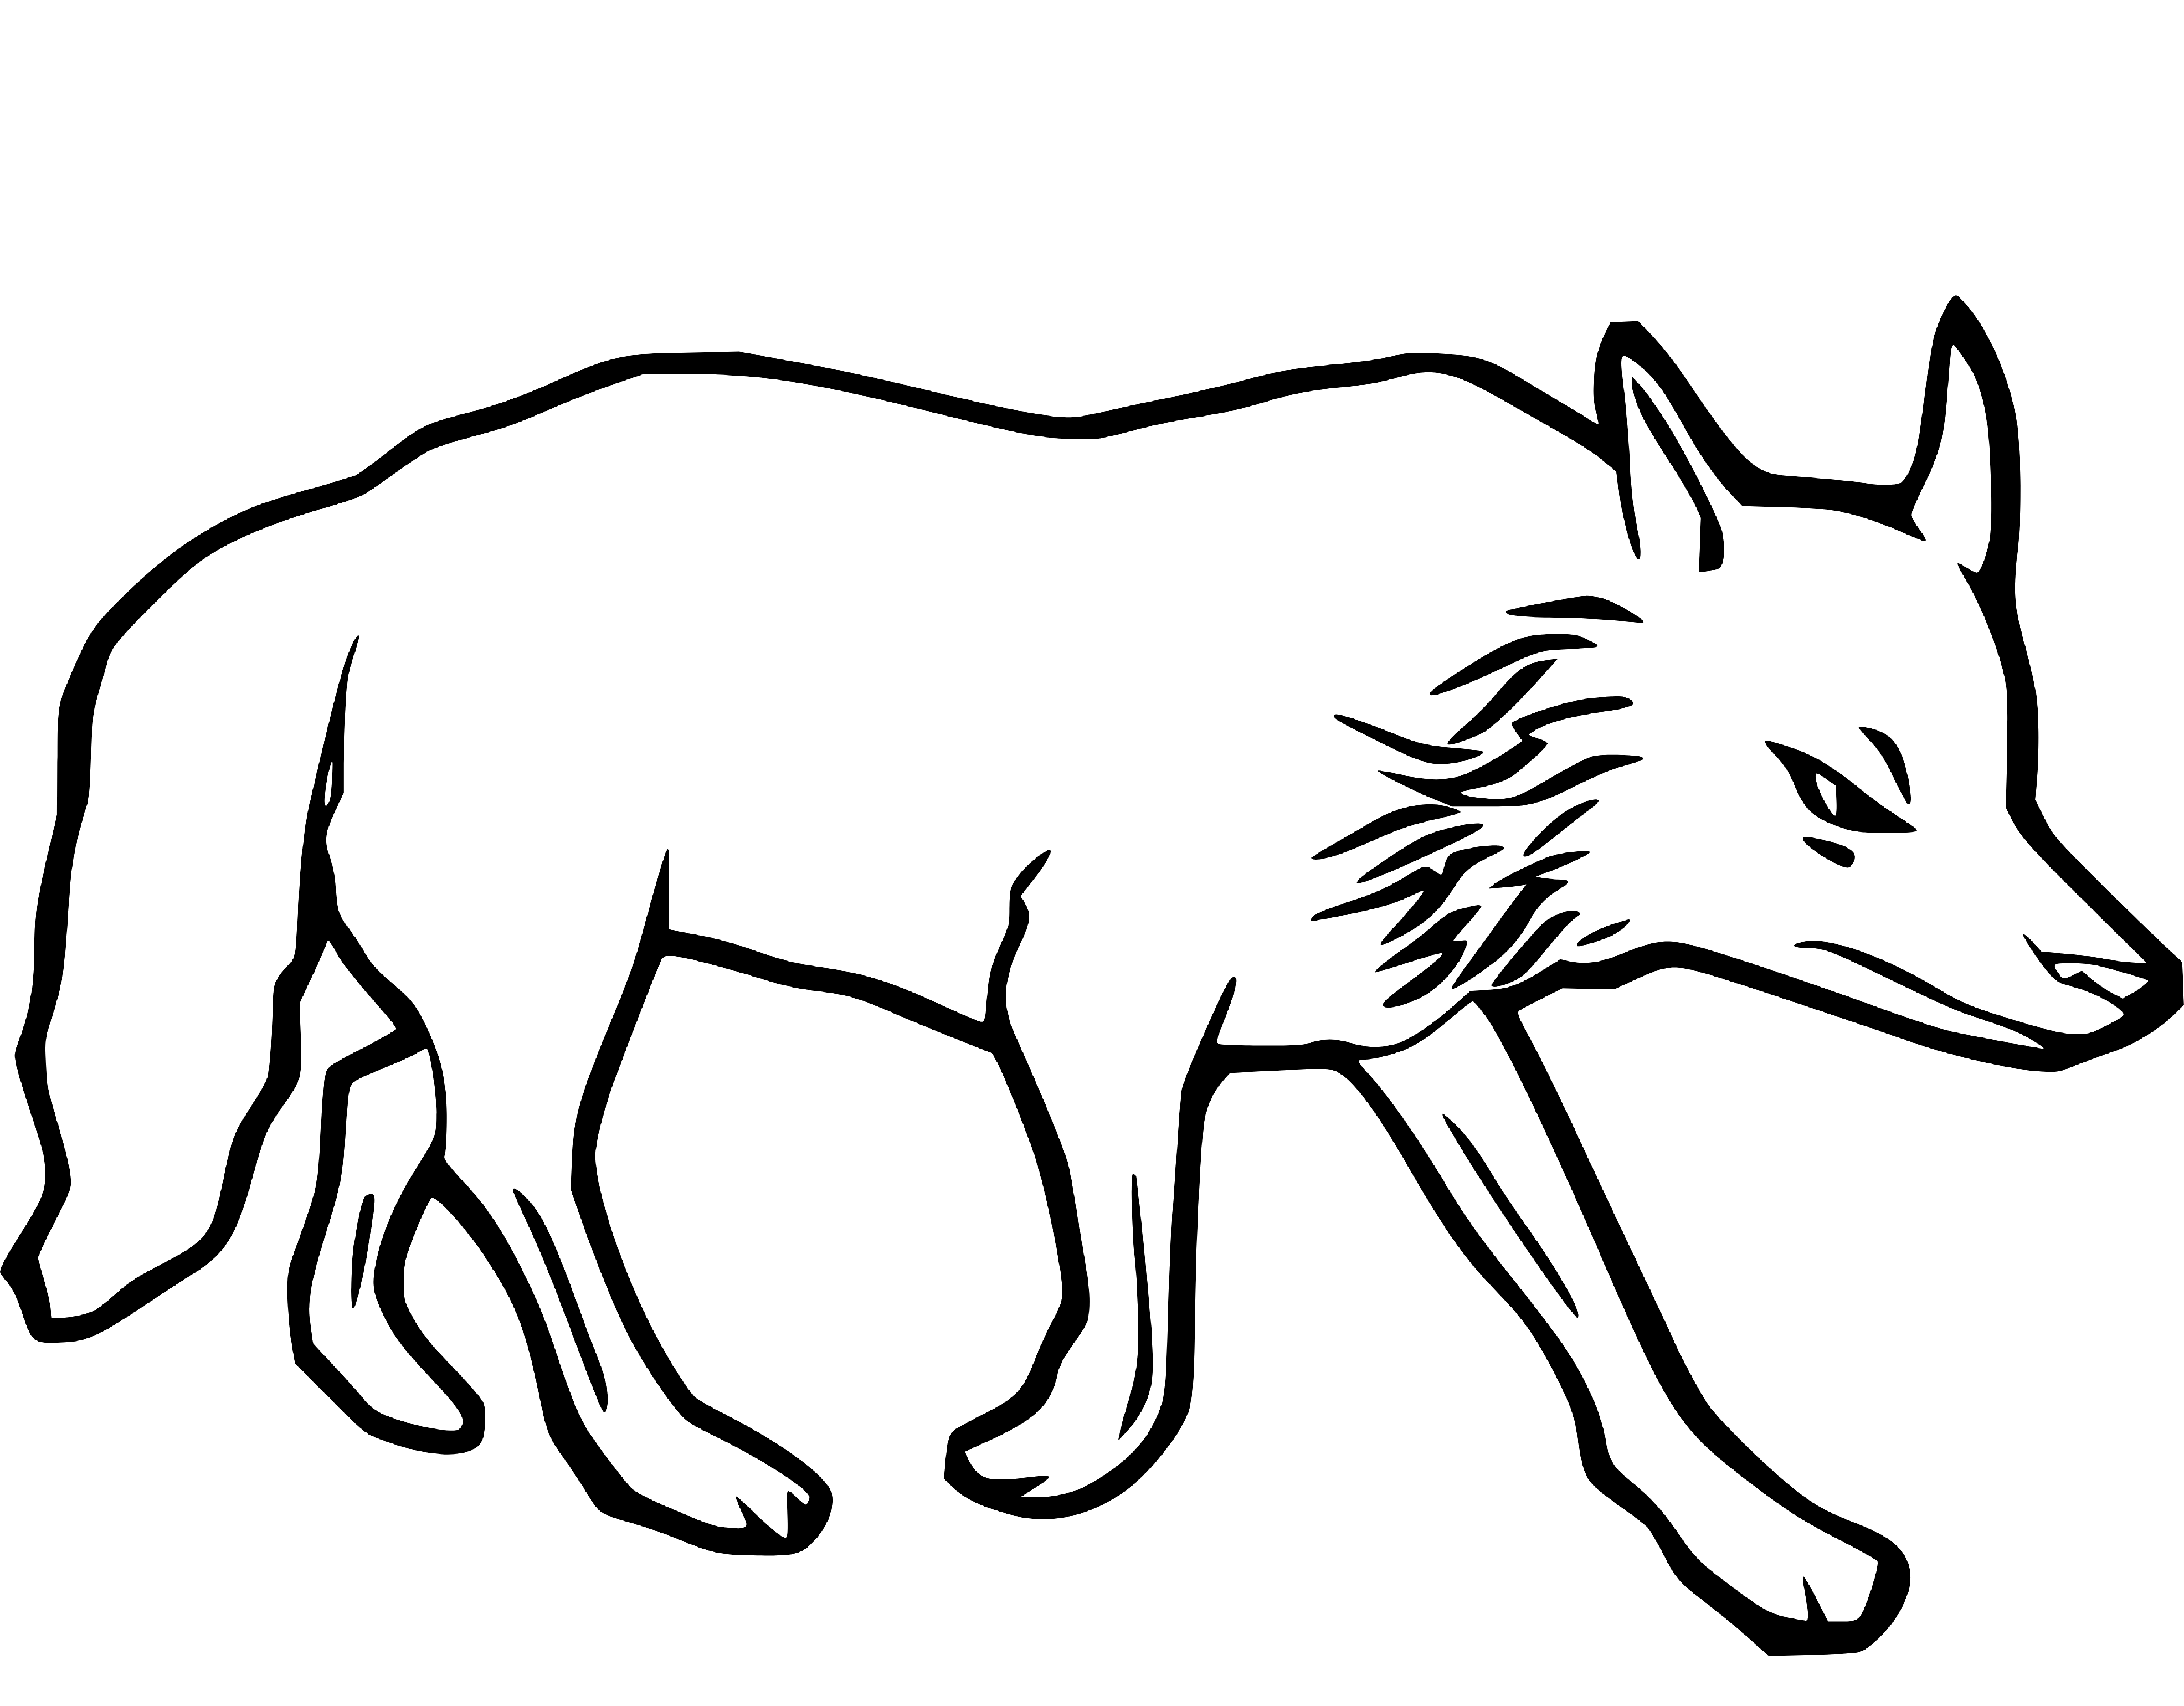 Printable Wolf Sketch to color Coloring Page for kids.